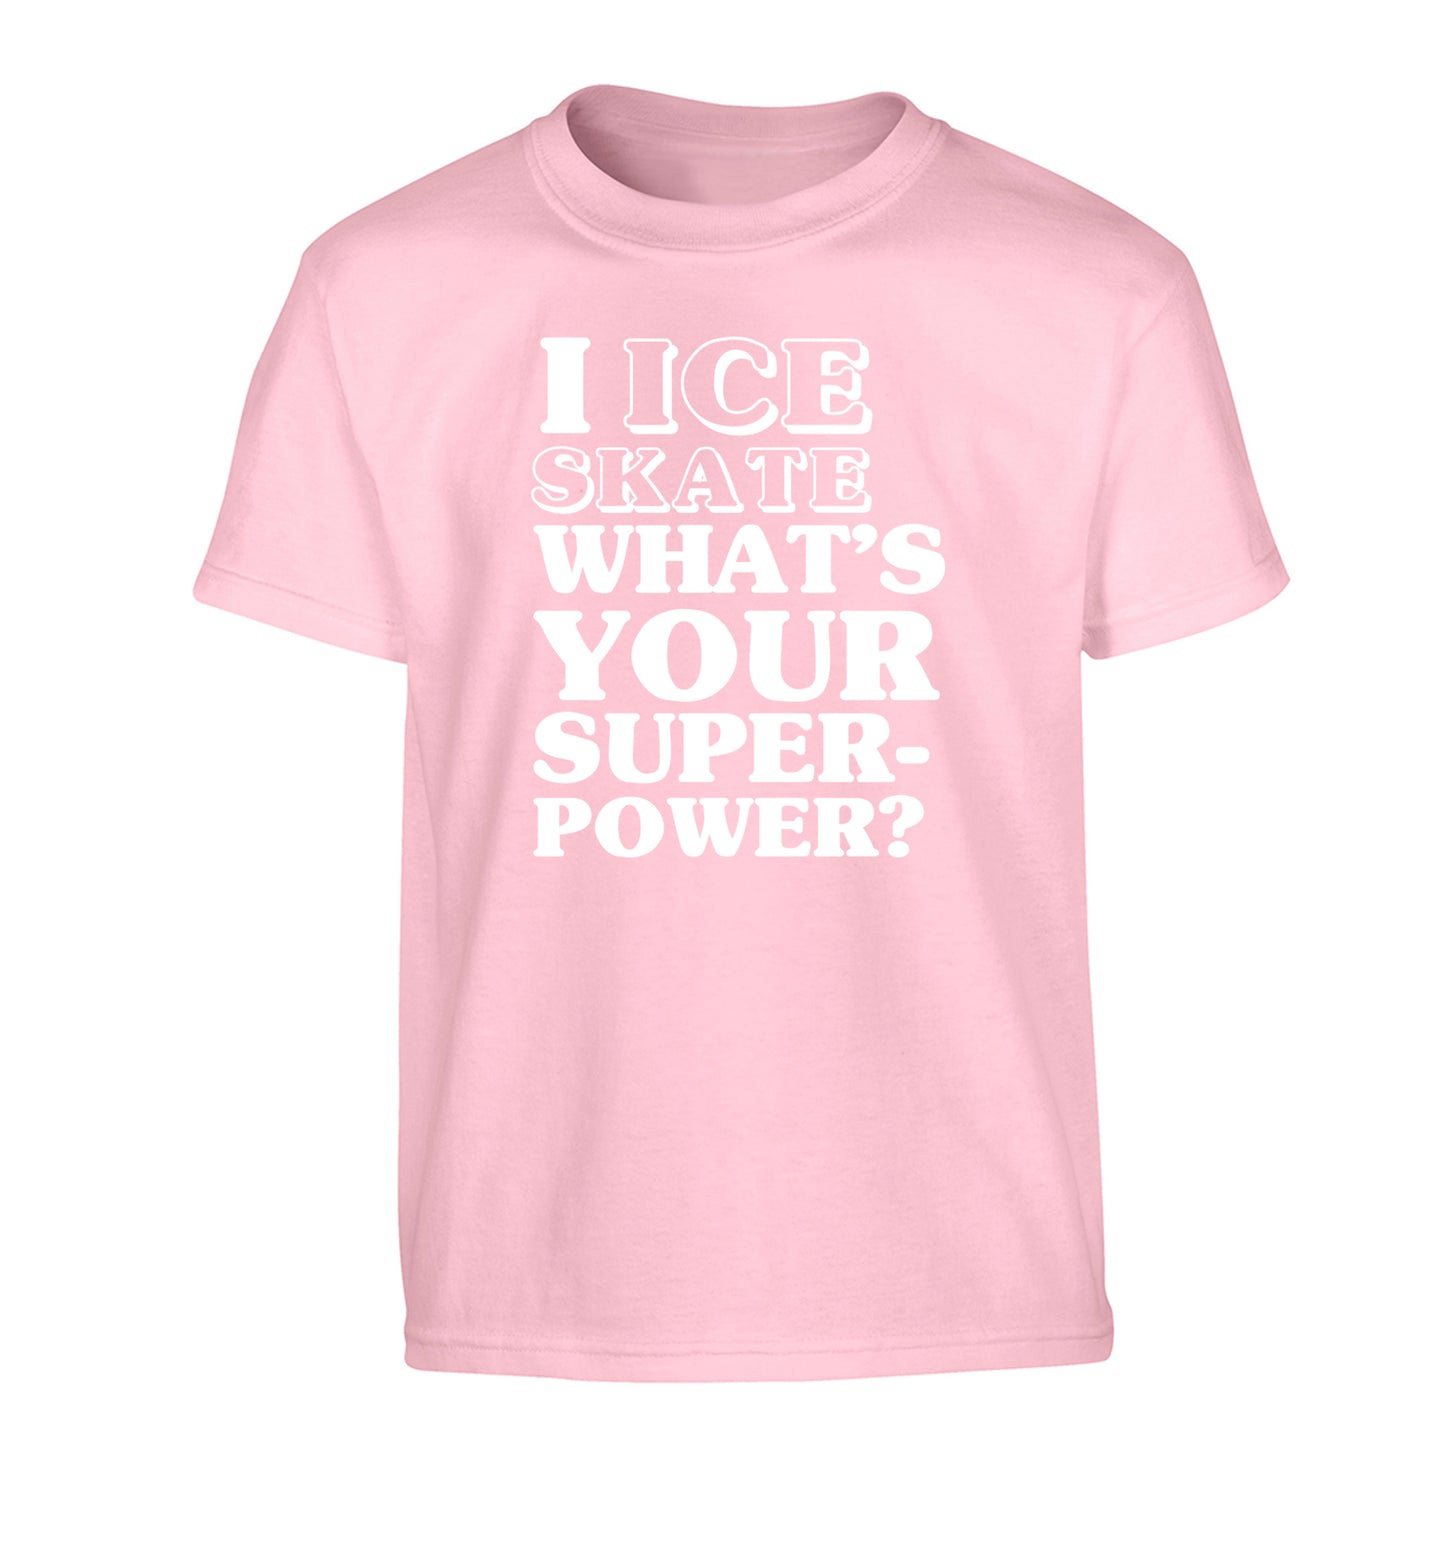 I ice skate what's your superpower? Children's light pink Tshirt 12-14 Years